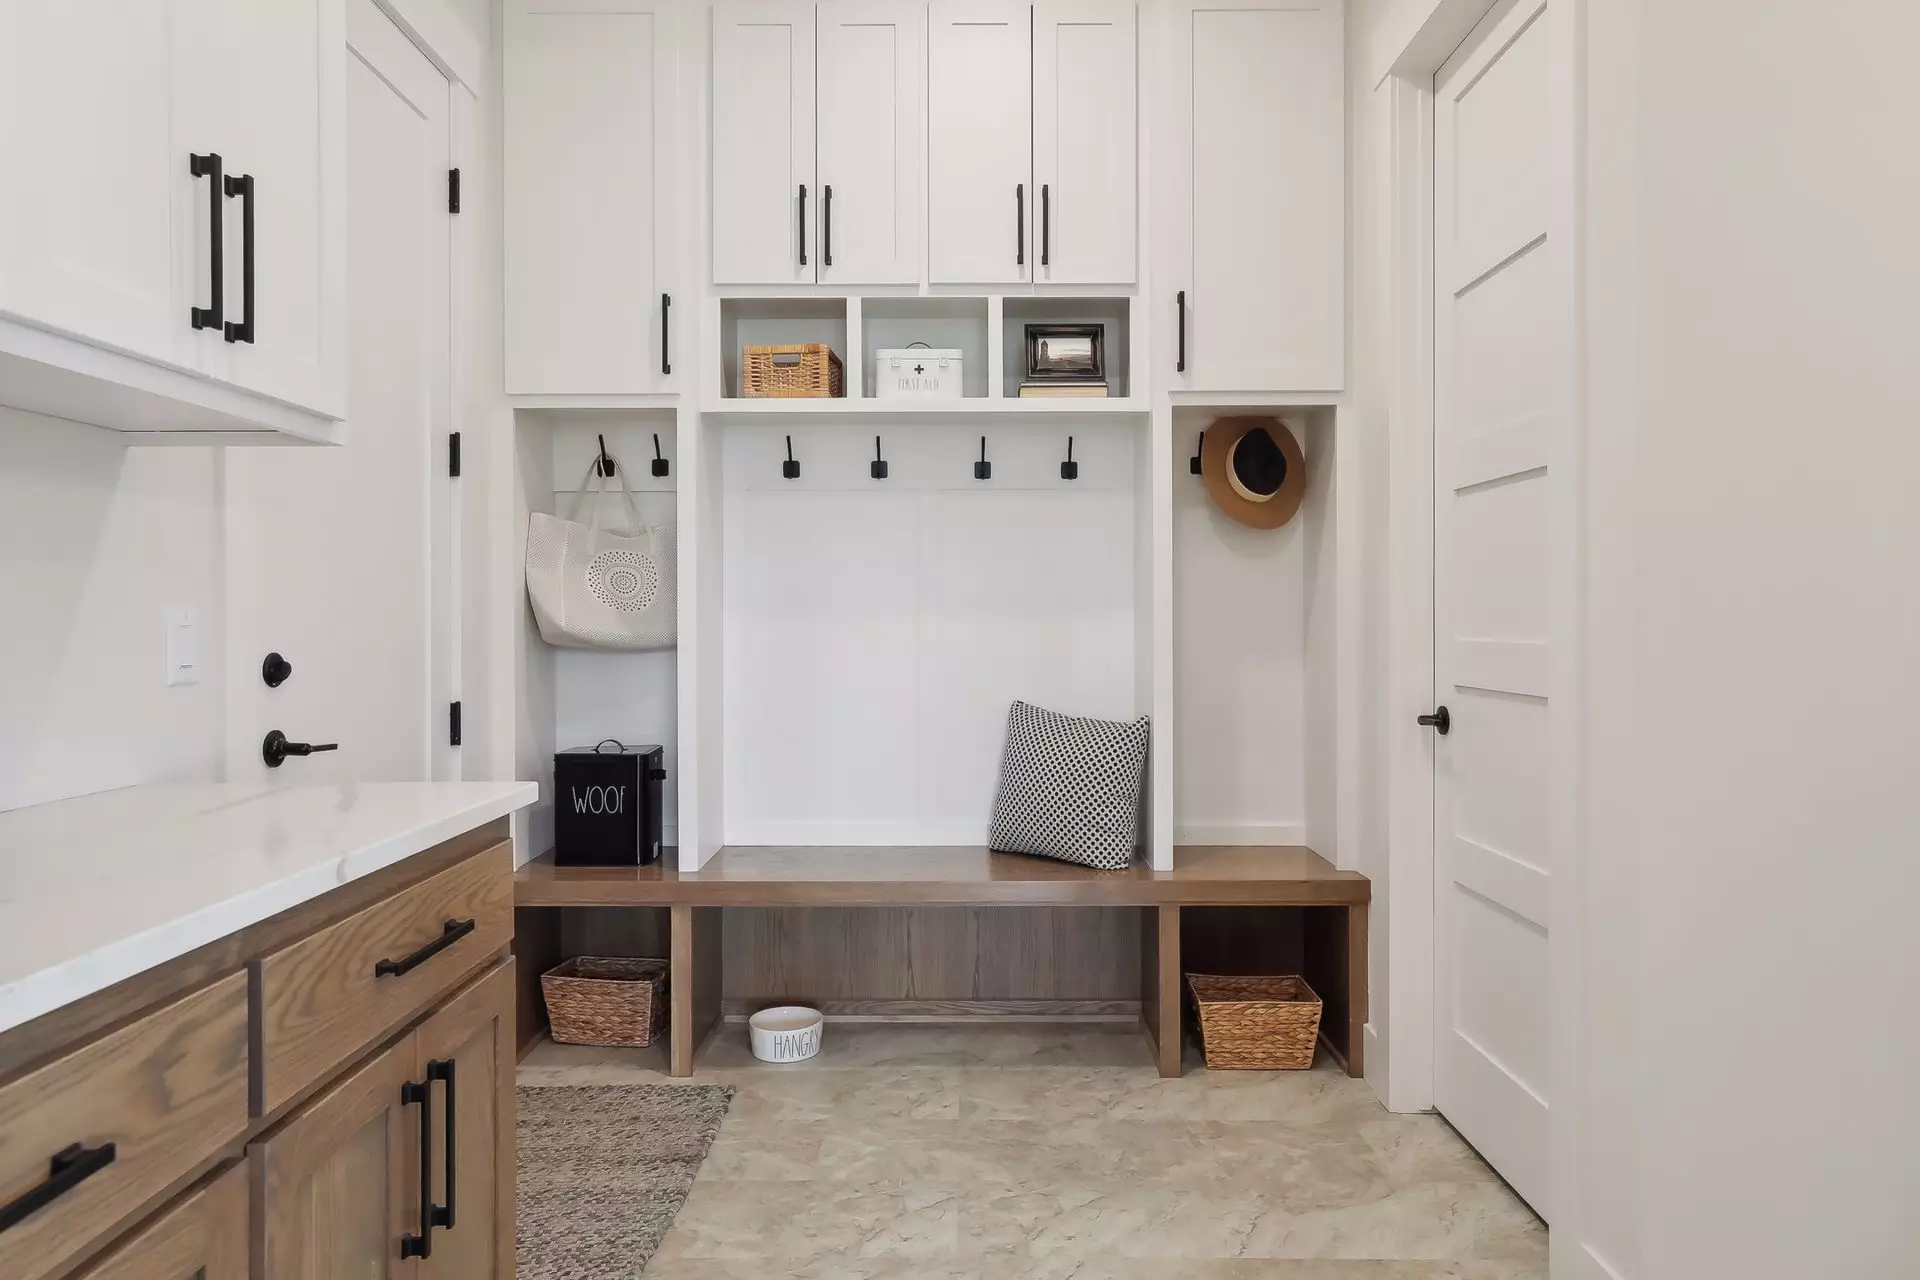 Mudroom has built-in bench and storage cabinets plus a walkin closet